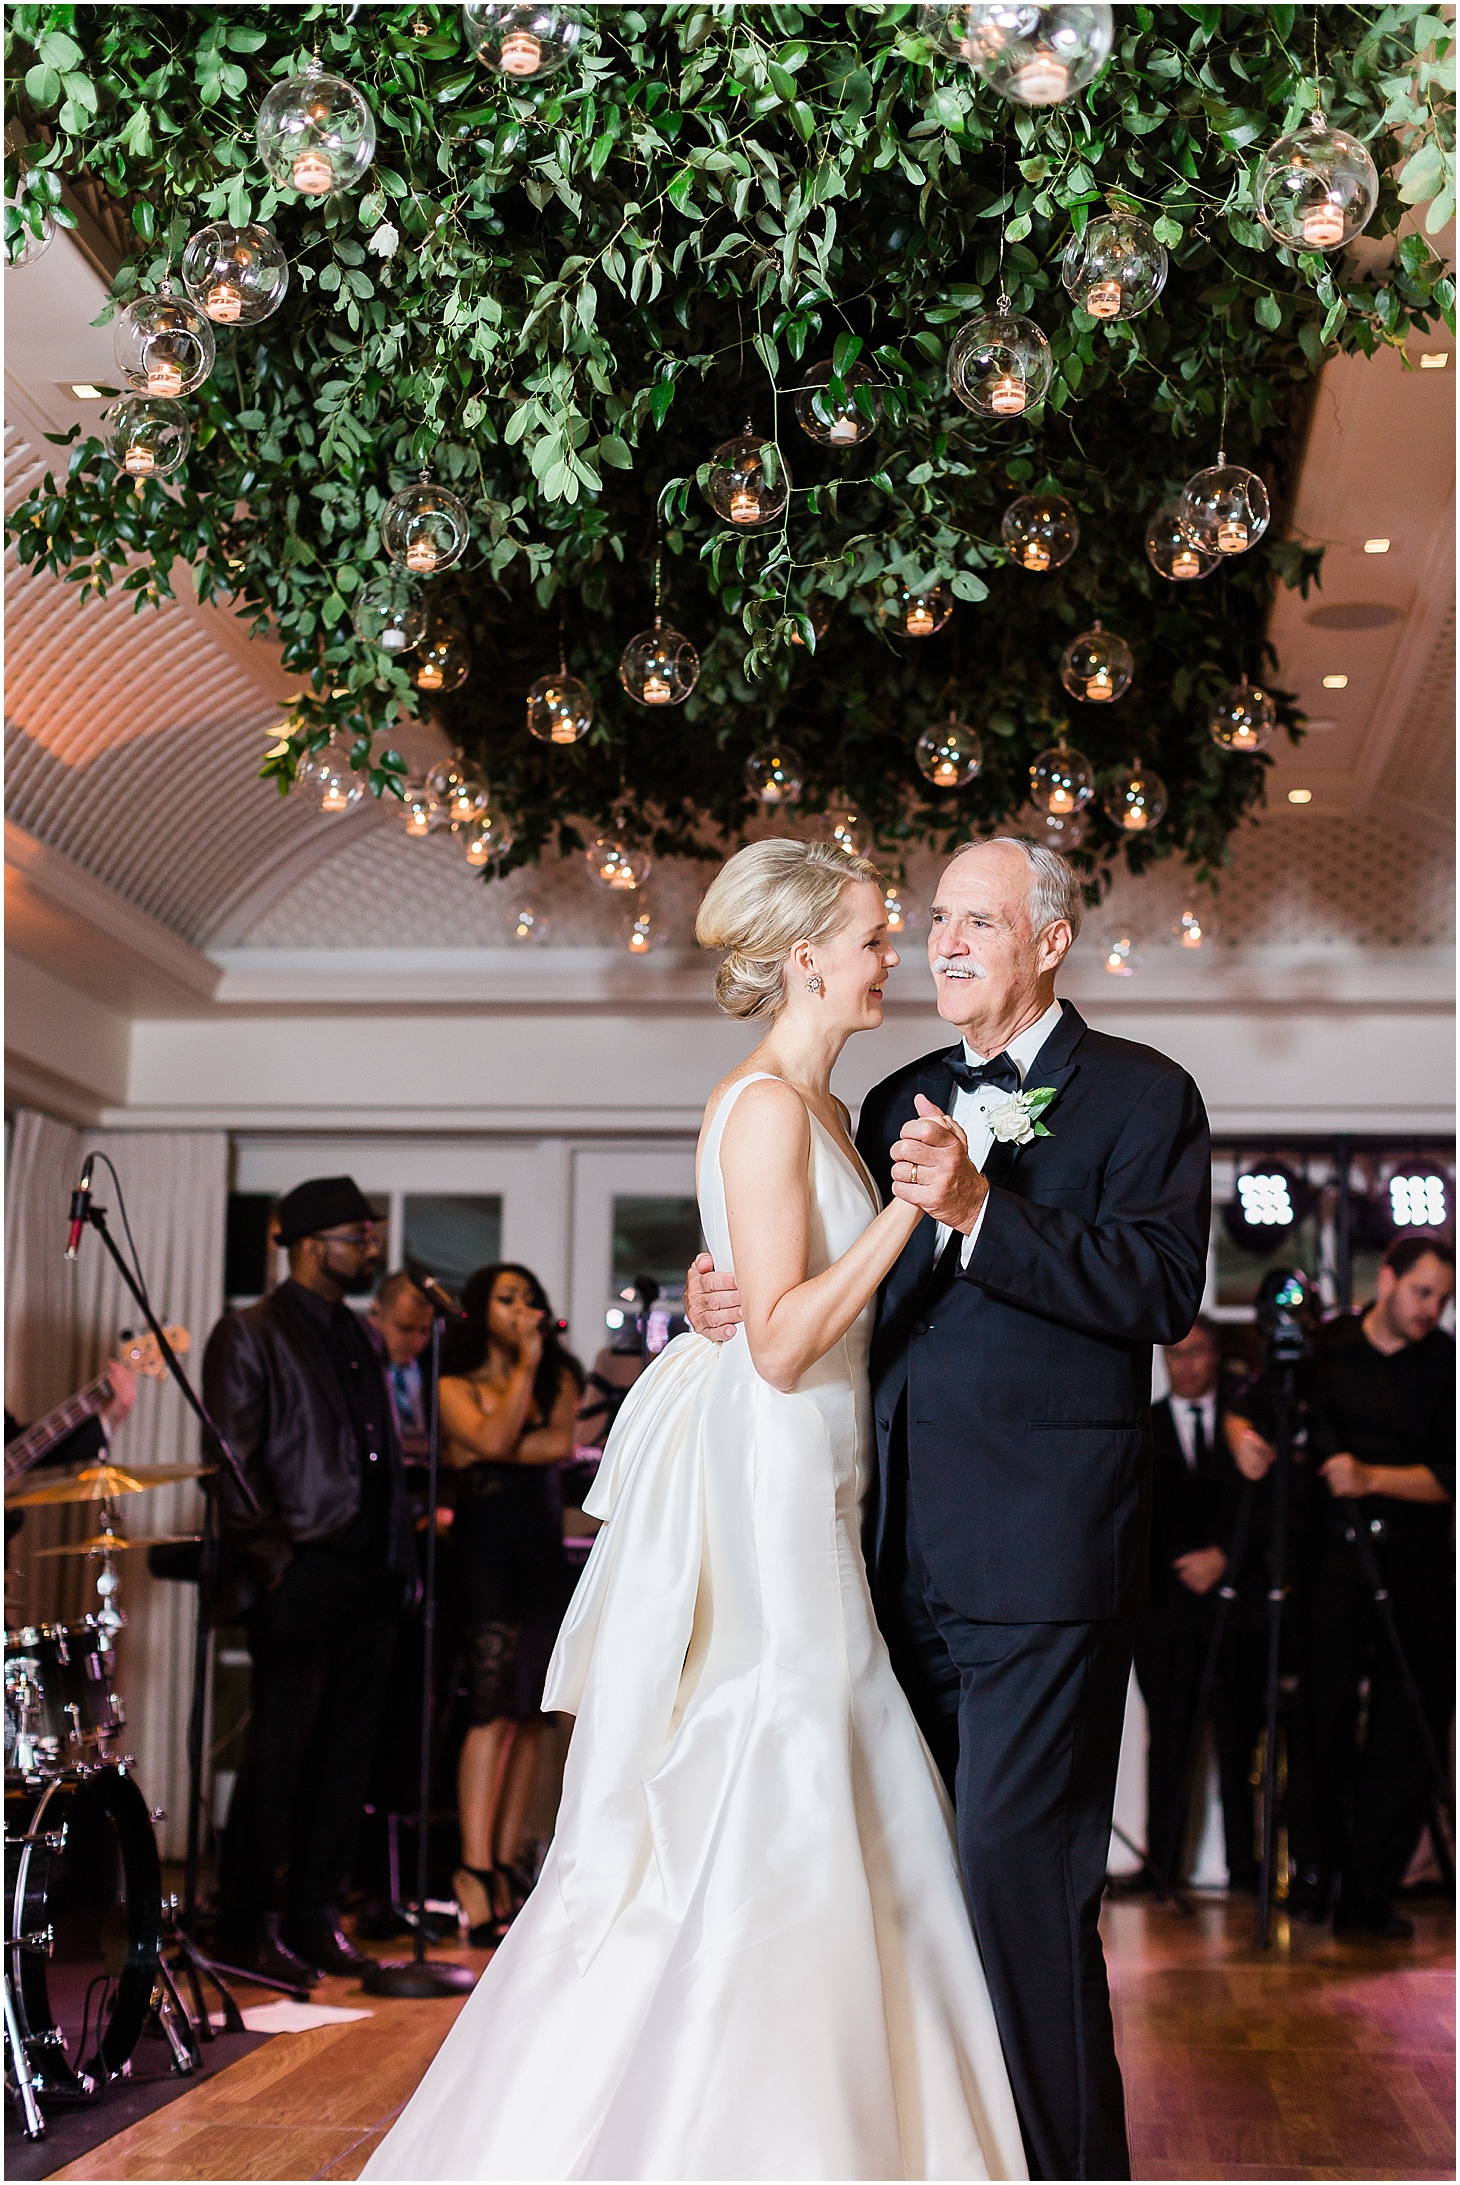 Father-Daughter Dance at Wedding Reception at the Hay-Adams Hotel, Champagne-toned Multicultural Wedding in Washington DC, Ceremony at National City Christian Church, Sarah Bradshaw Photography, DC Wedding Photographer